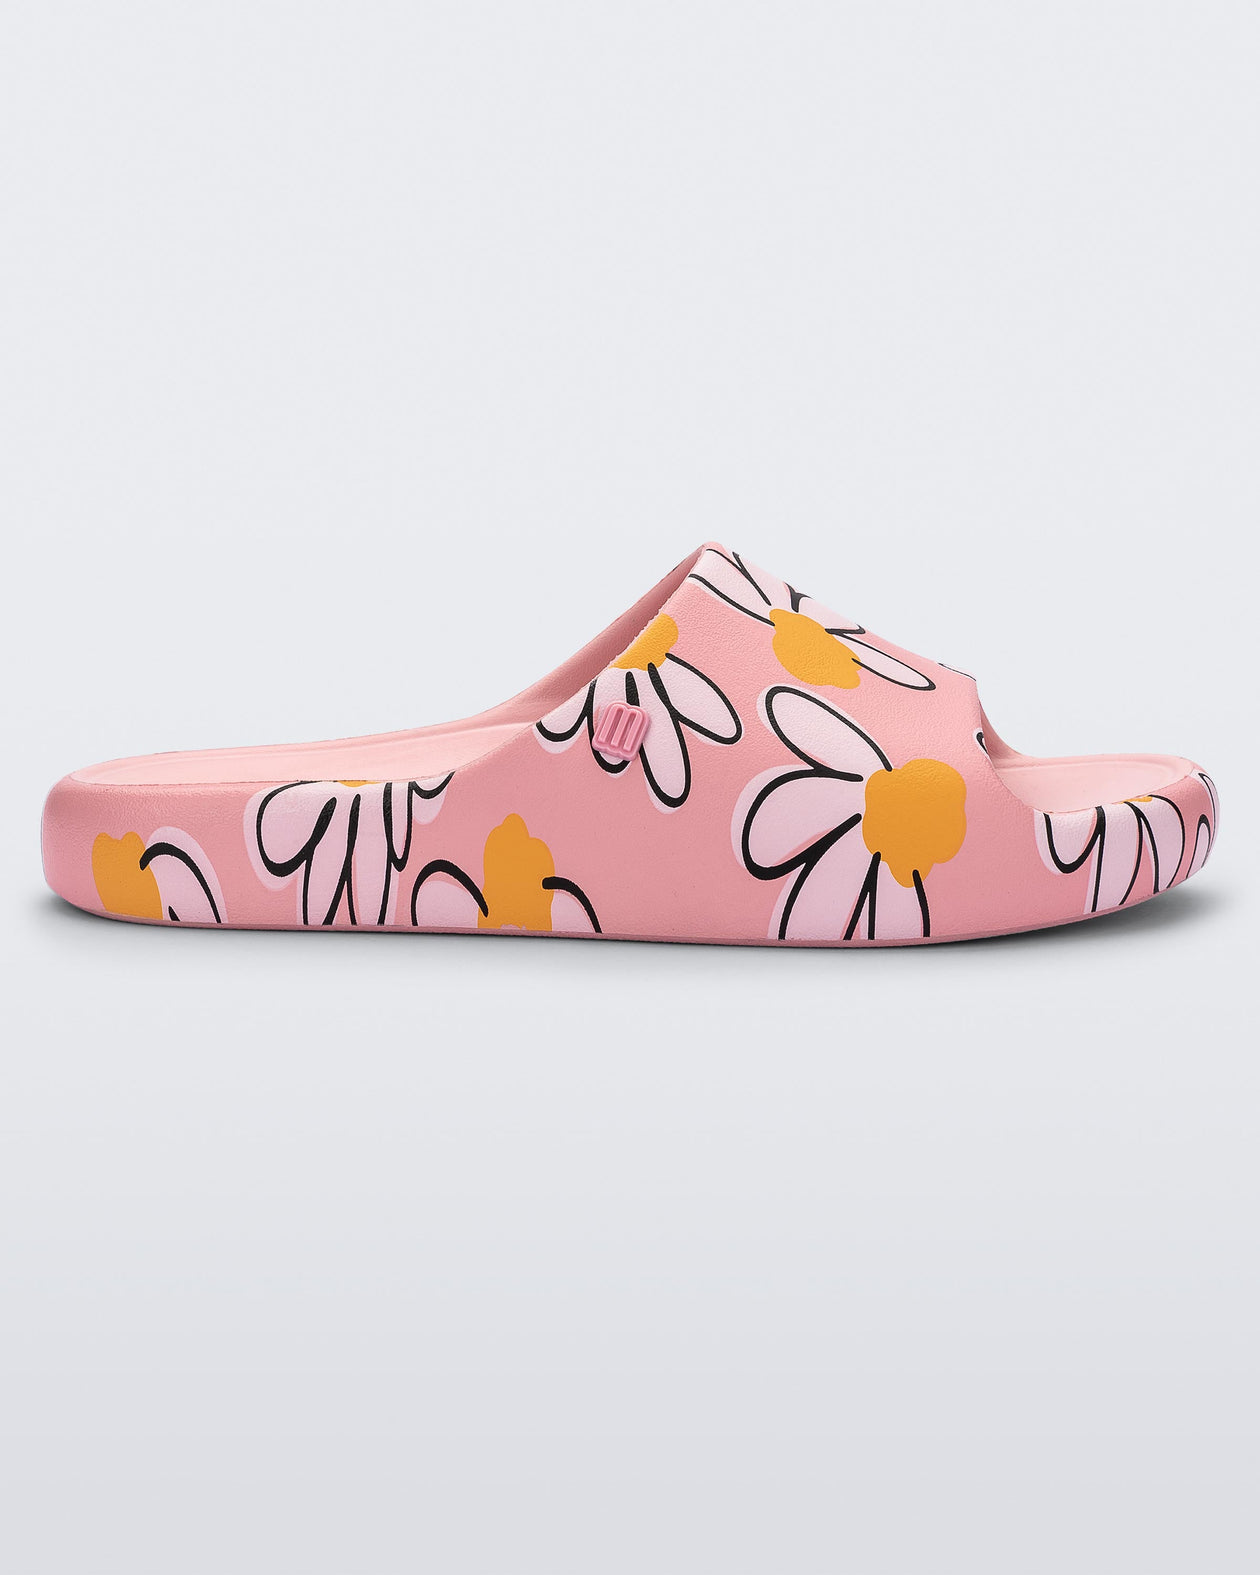 Side view of a pink Free Print slide with daisy print flowers